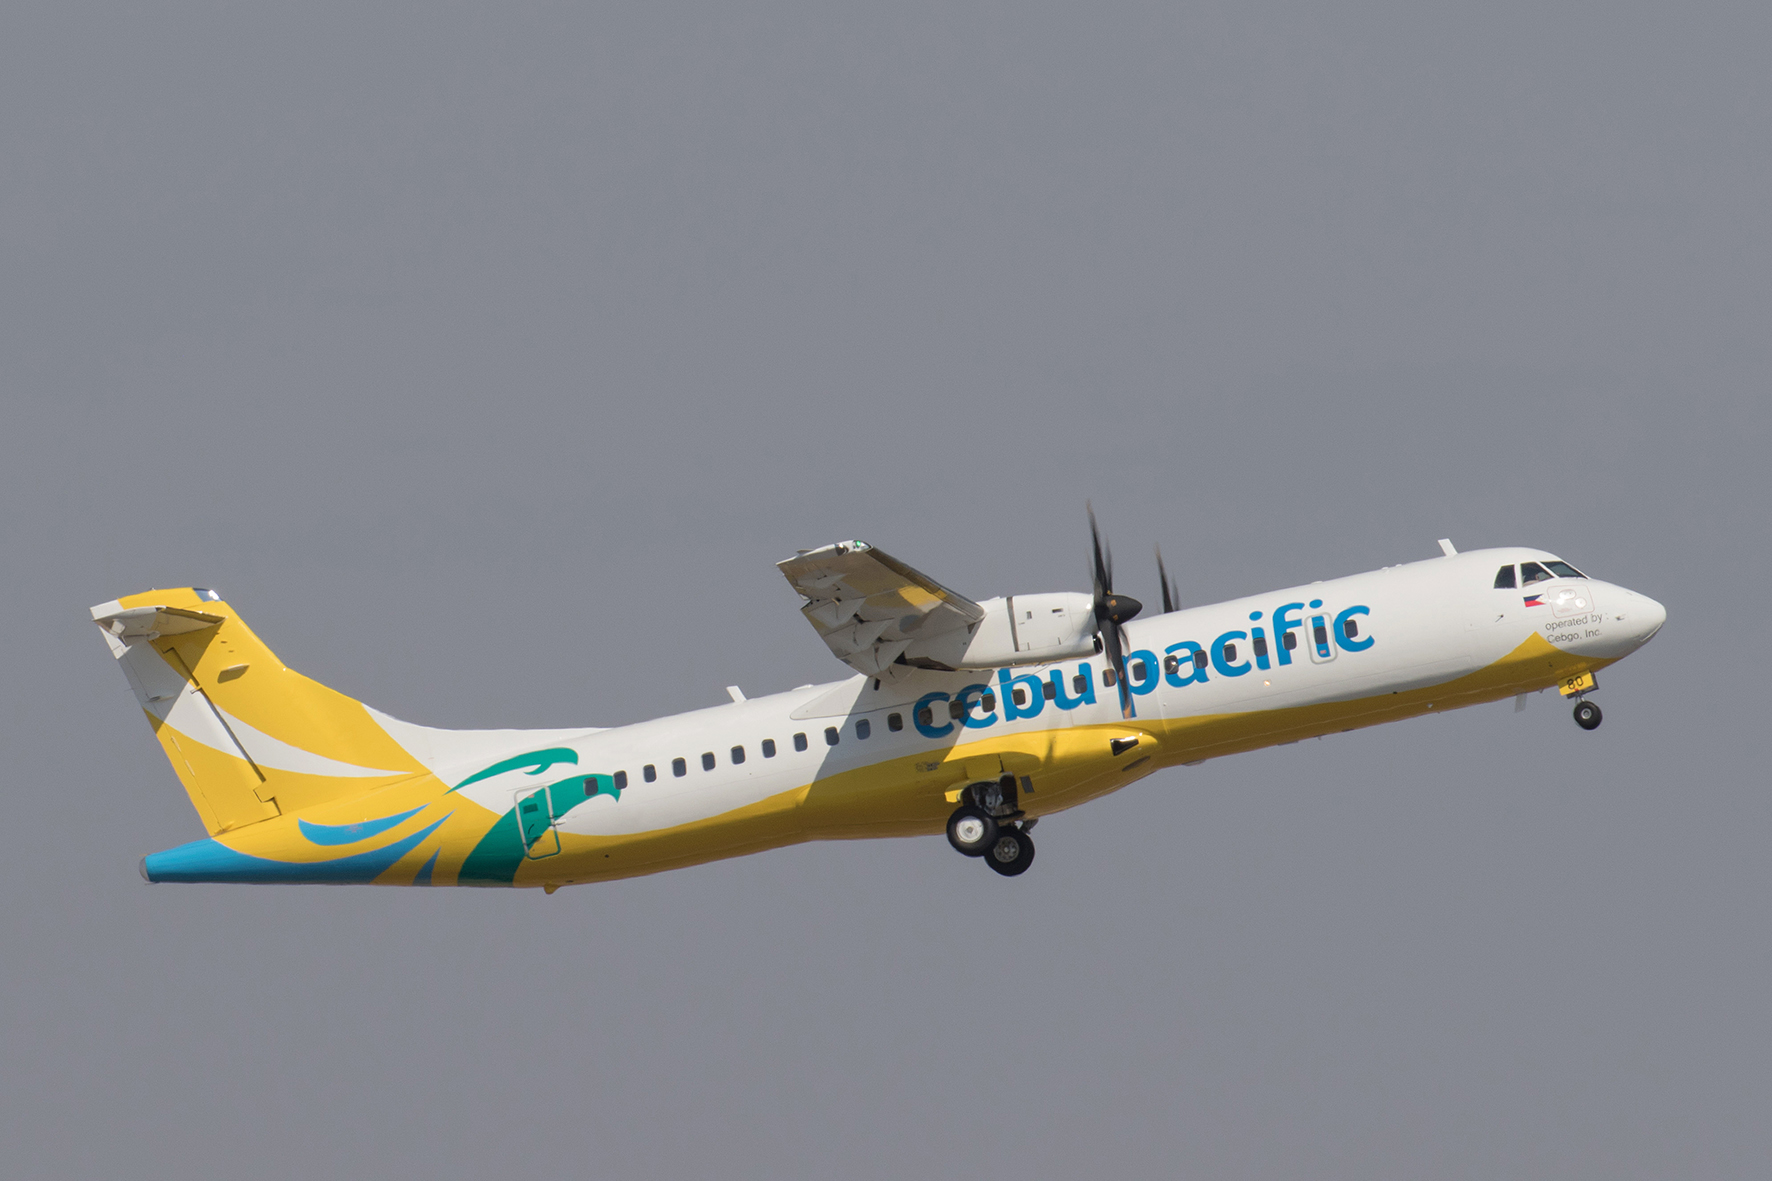 Cebu Pacific aims to reach pre-pandemic capacity the end of Q1 of 2023